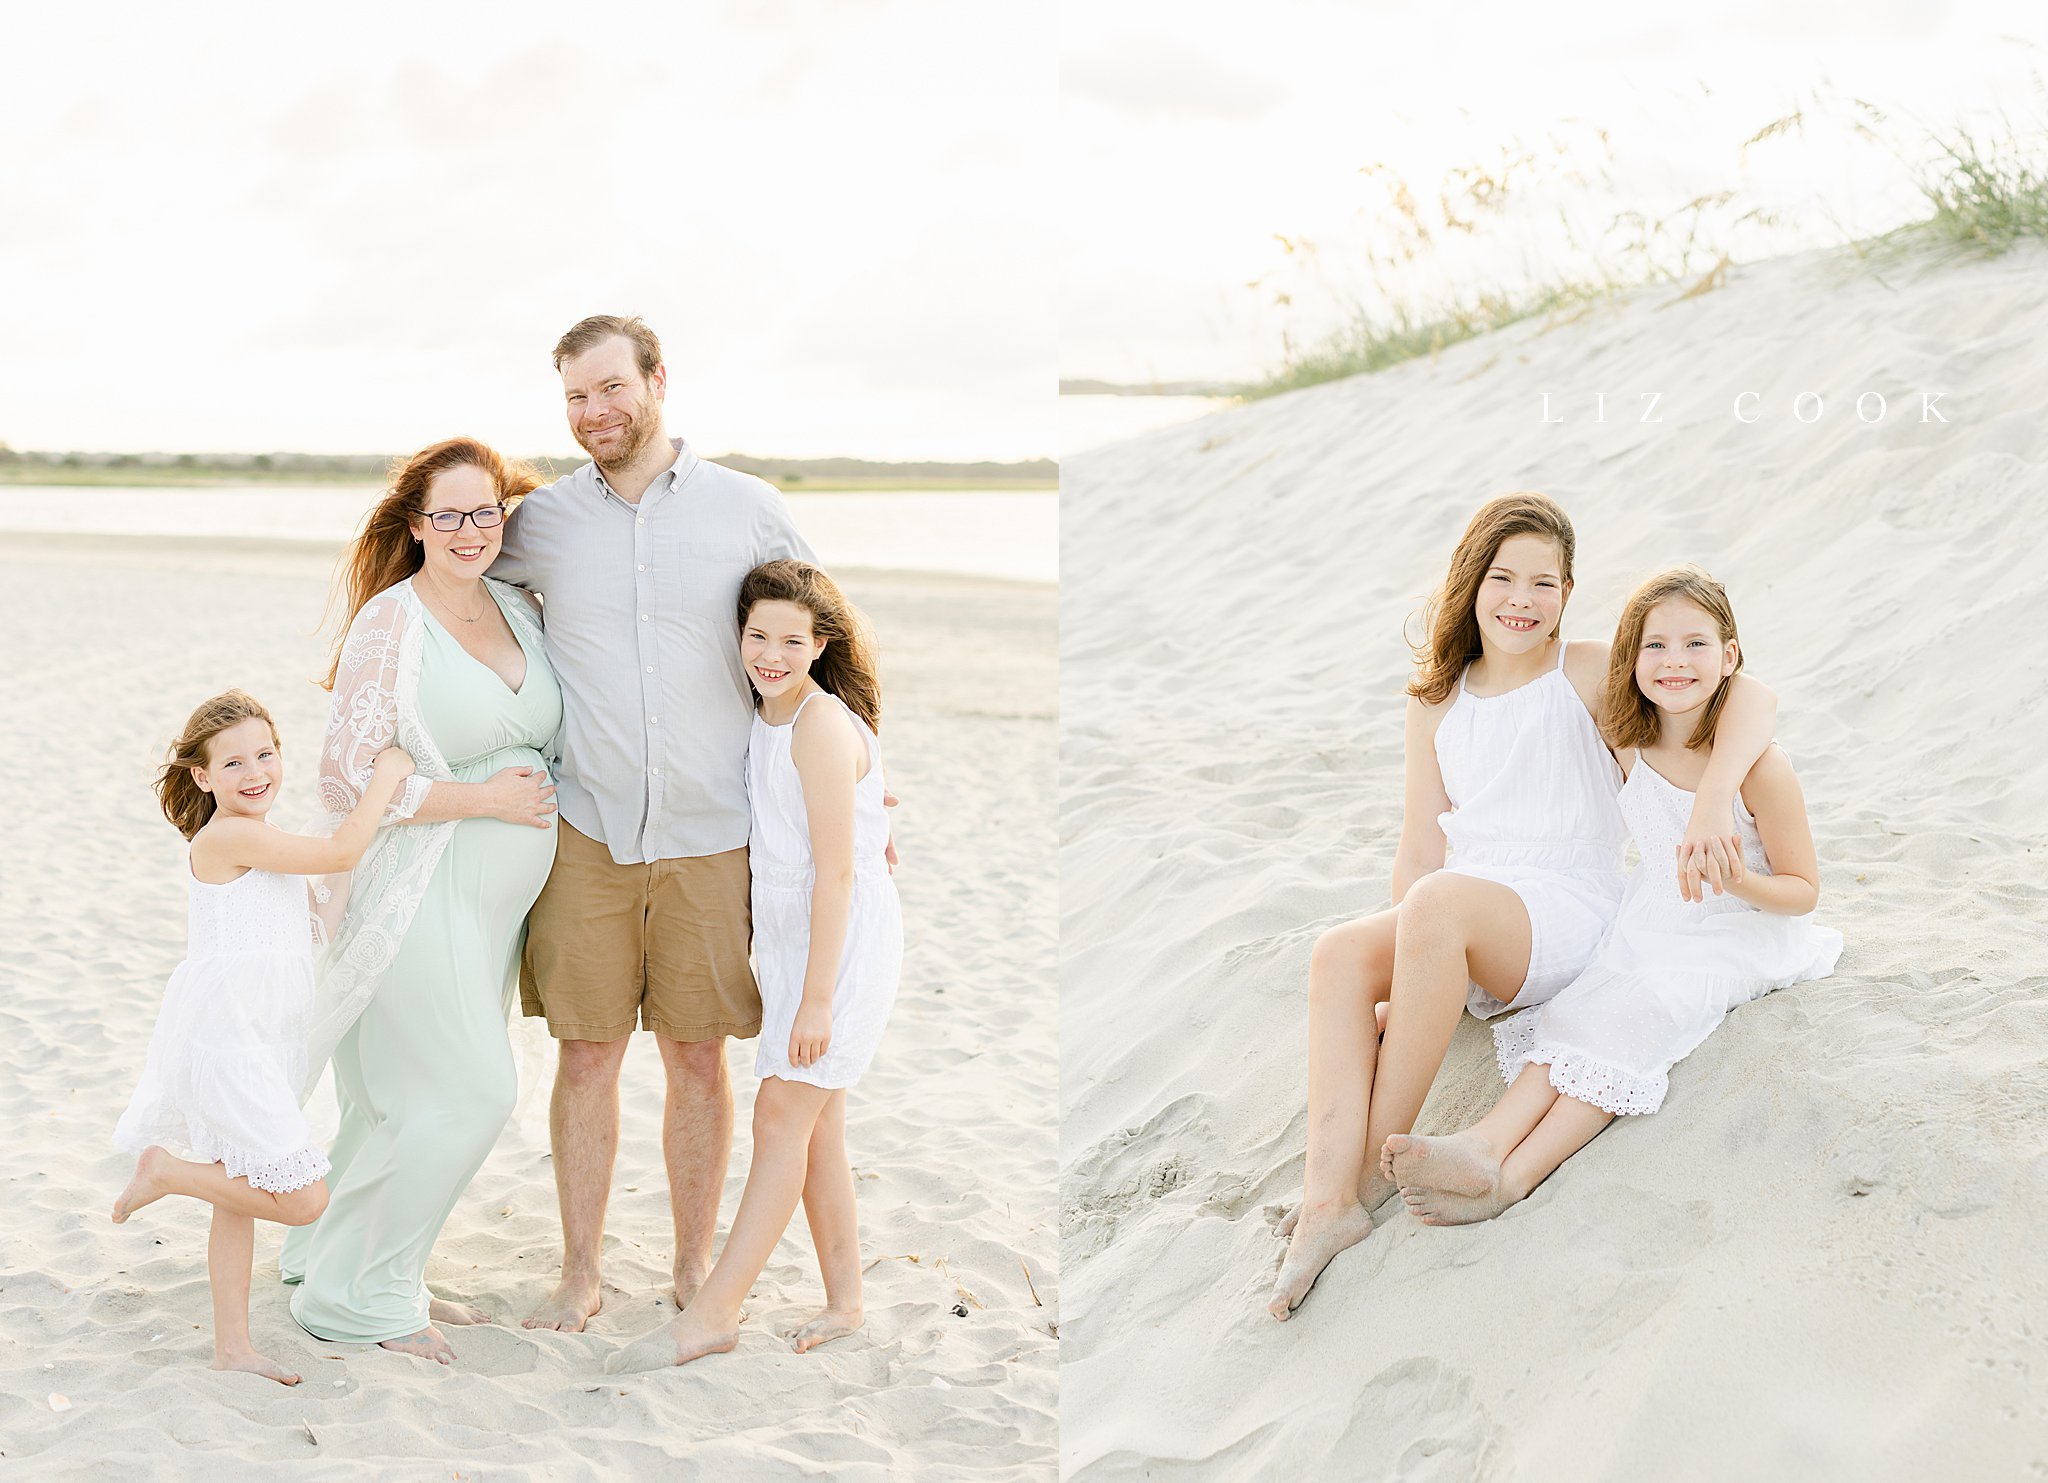 maternity-pictures-on-beach-liz-cook-photography-caroline-jean-photography_0007.jpg